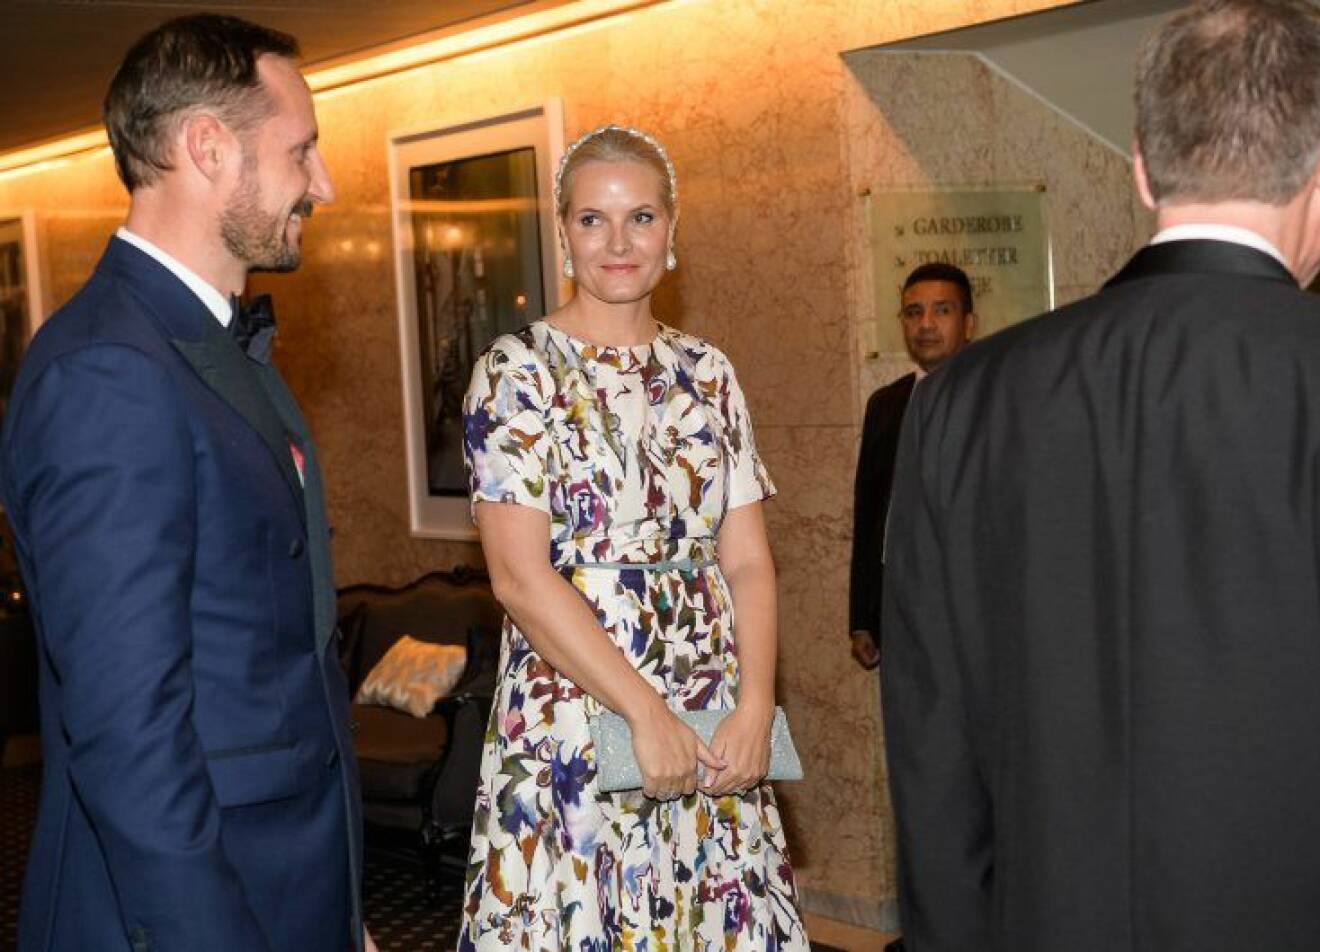 Oslo 2016-12-10 OFFICIAL BANQUET in honour of the Nobel Peace Prize Laureate, President Juan Manuel Santos at Grand Hotel in Oslo. Pictured:  Crown Princess Mette-Marit and Crown Prince Haakon. COPYRIGHT STELLA PICTURES